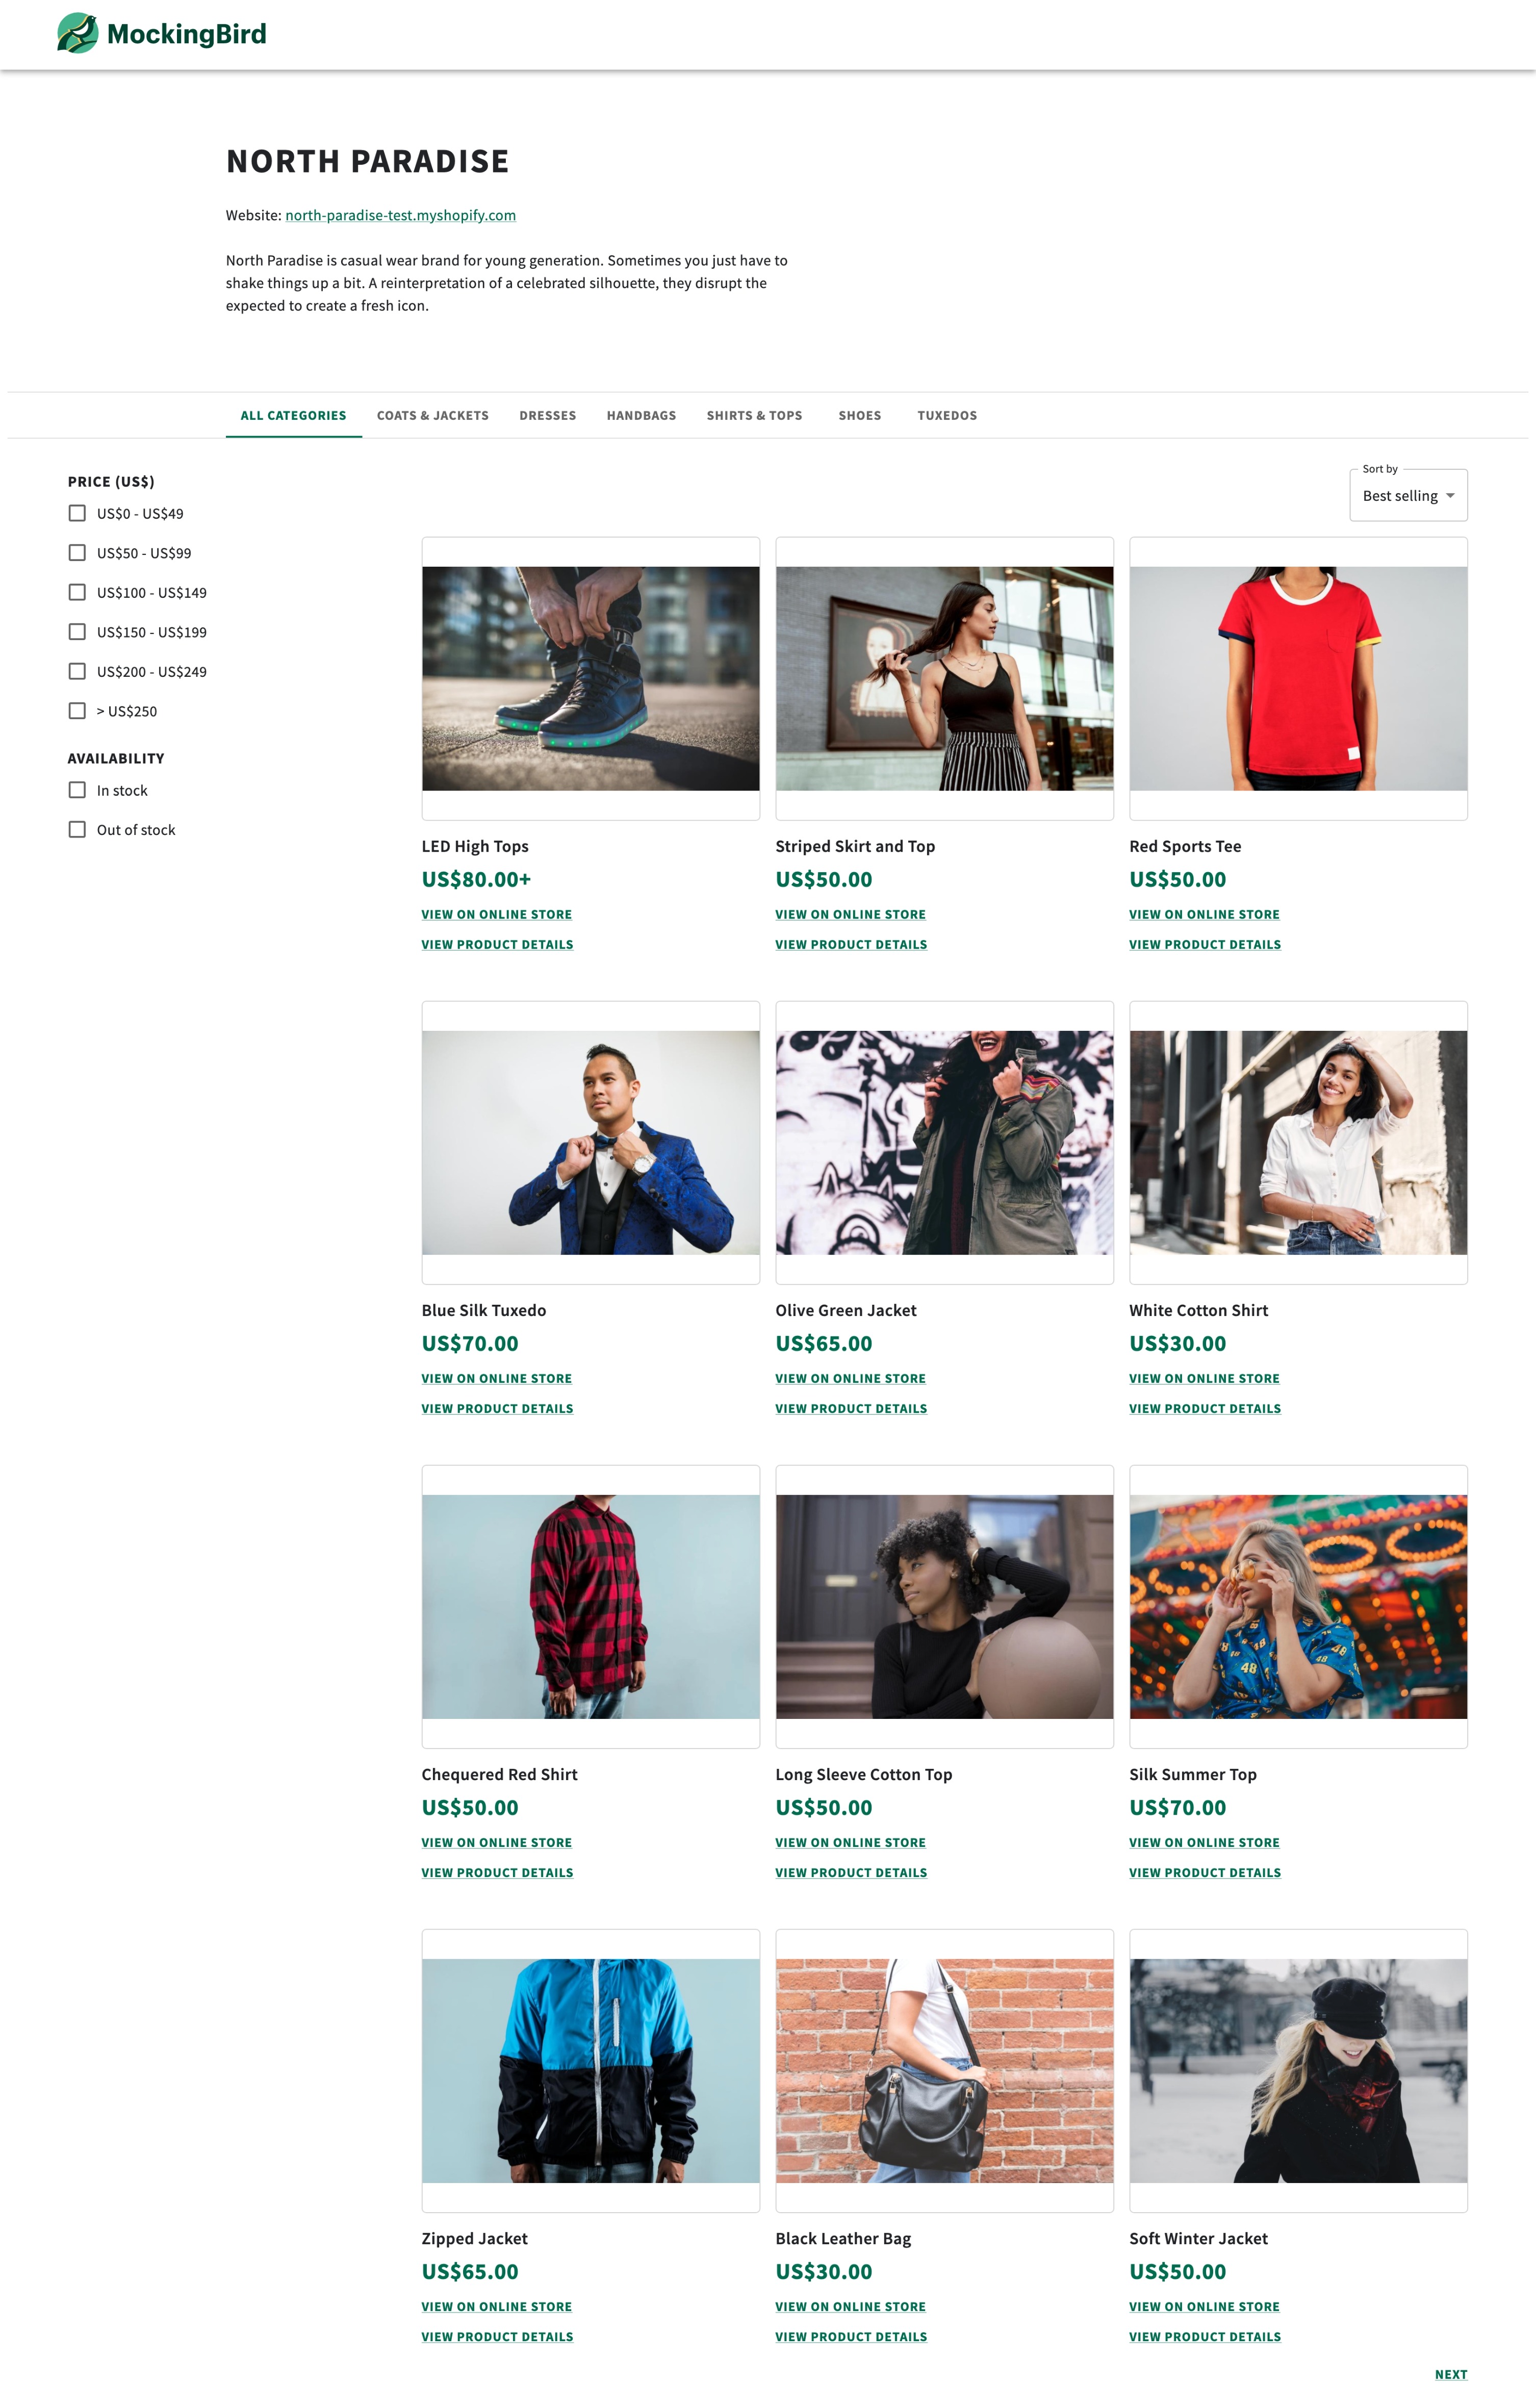 An image of the shop page where products include a link to view product details